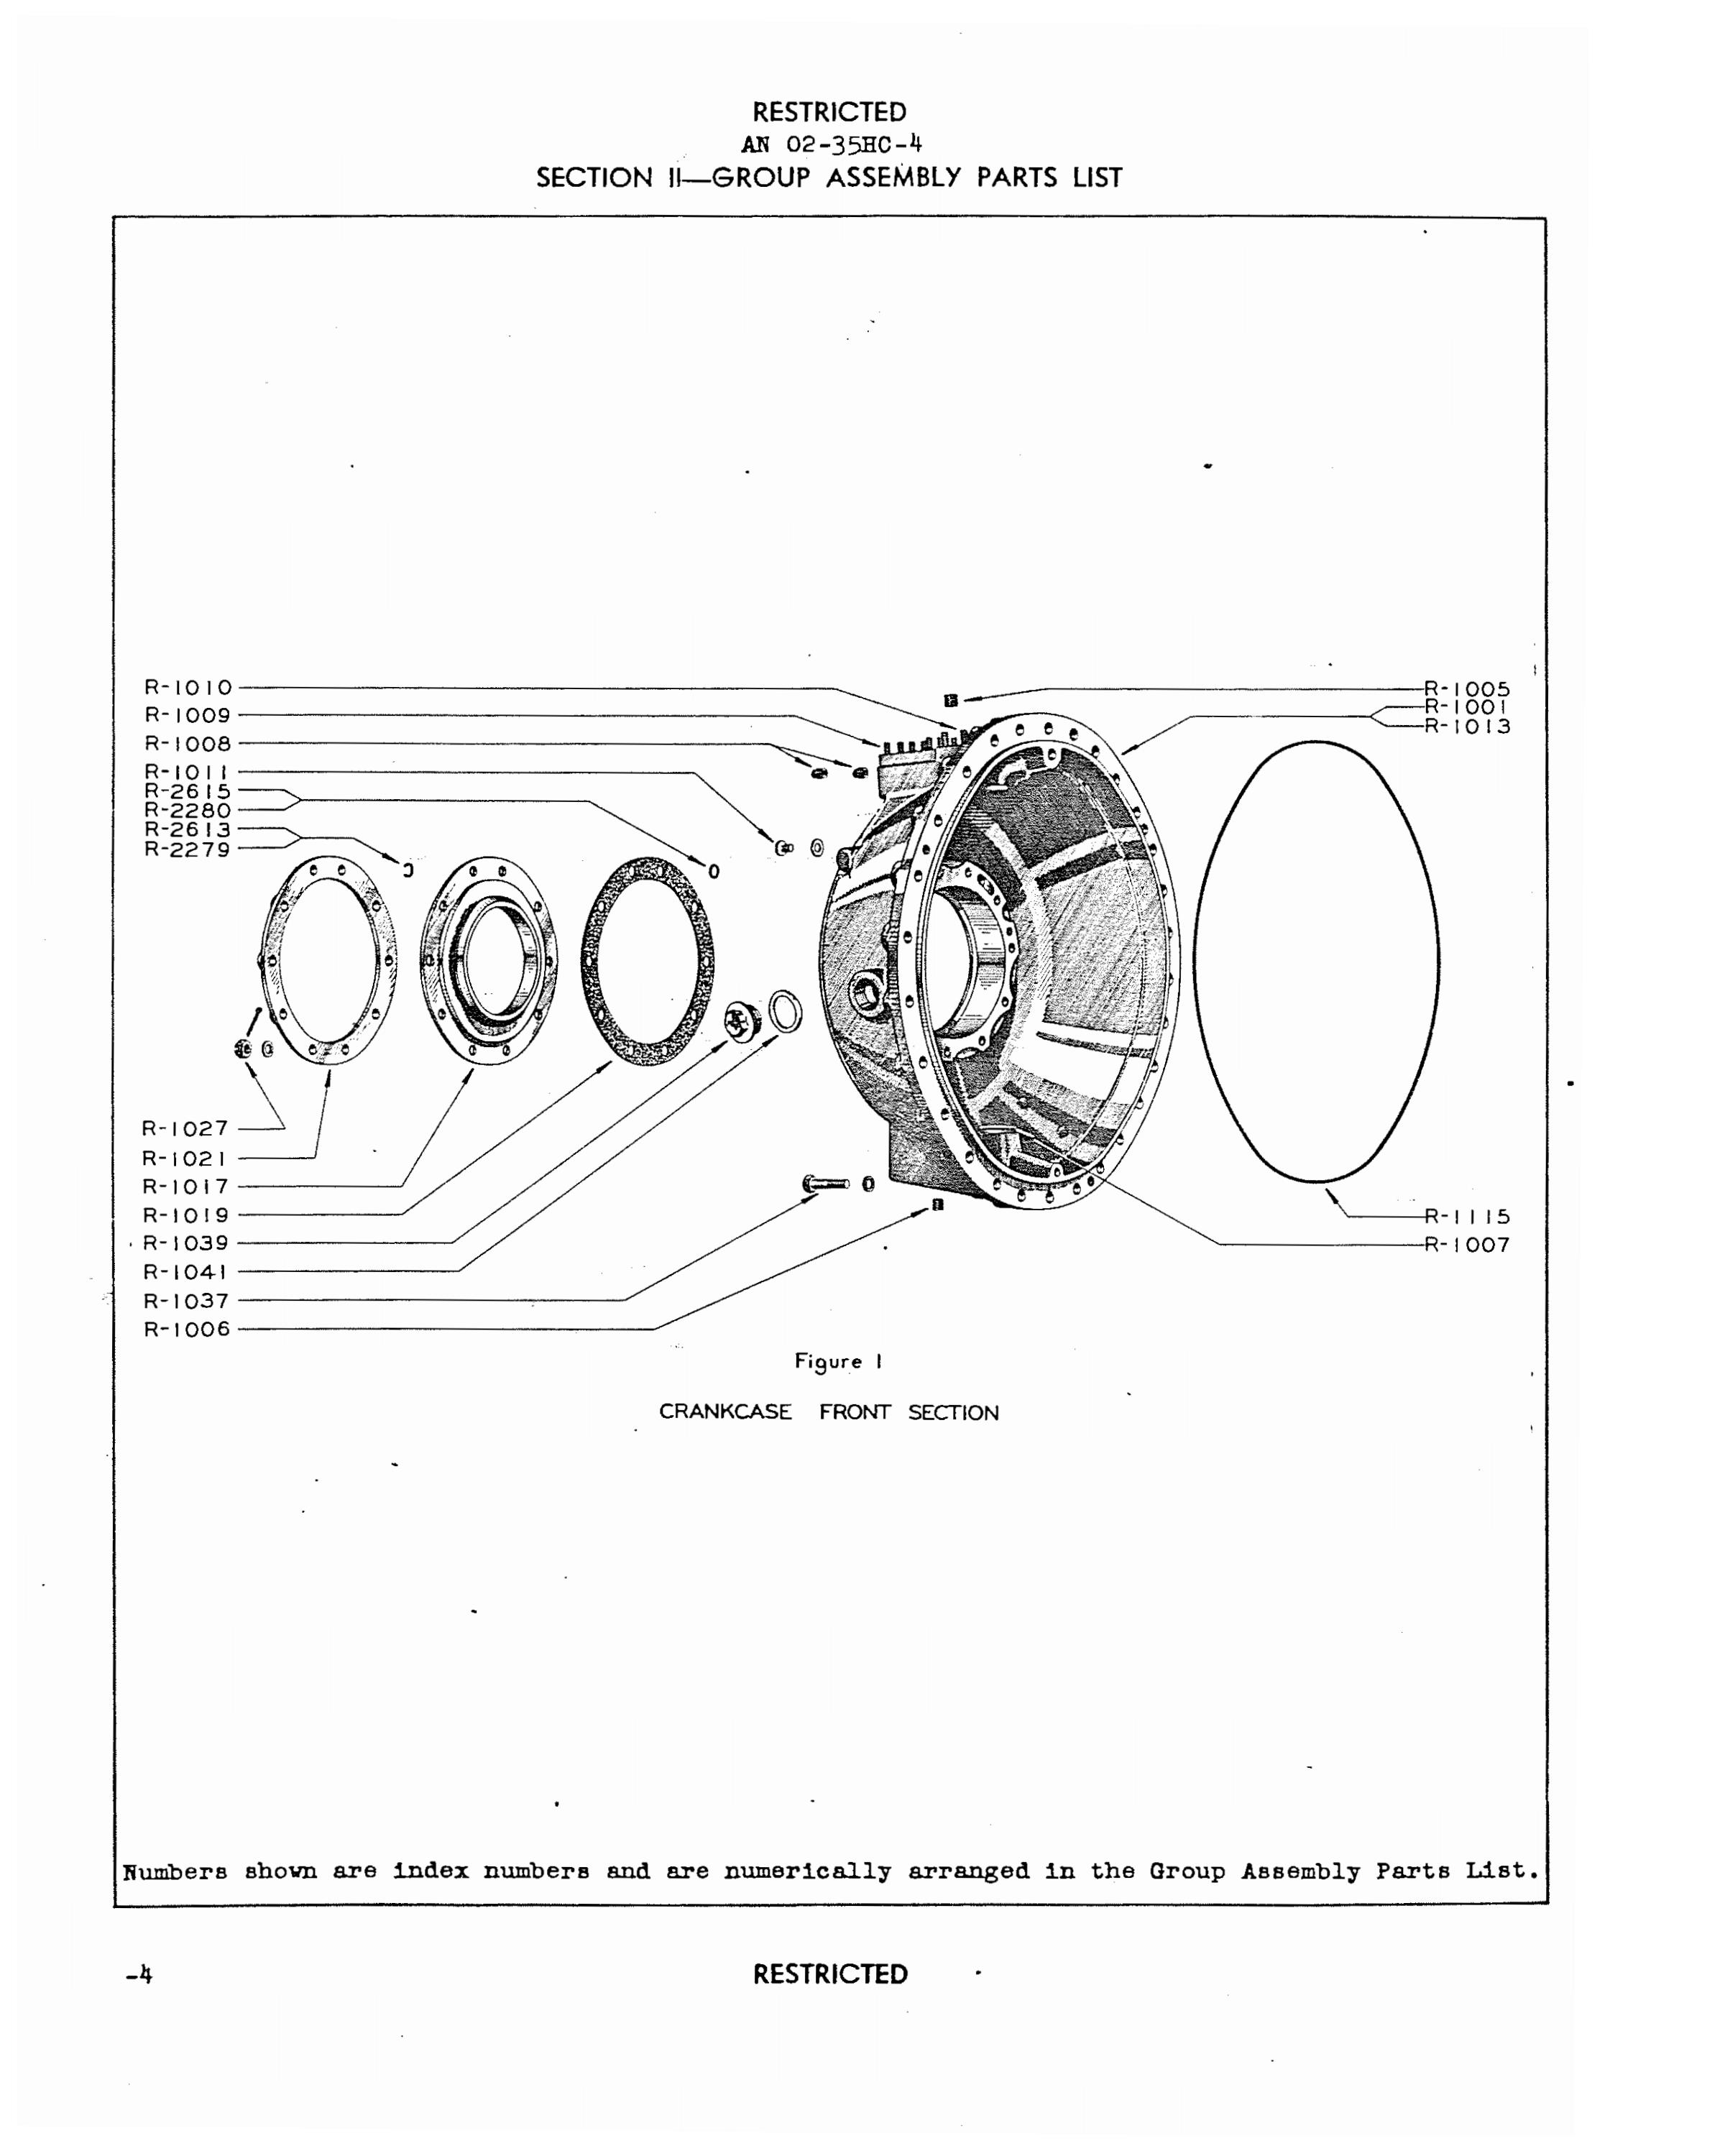 Sample page 8 from AirCorps Library document: Parts Catalog for Aircraft Engines Models R2600-20 and R-2600-22